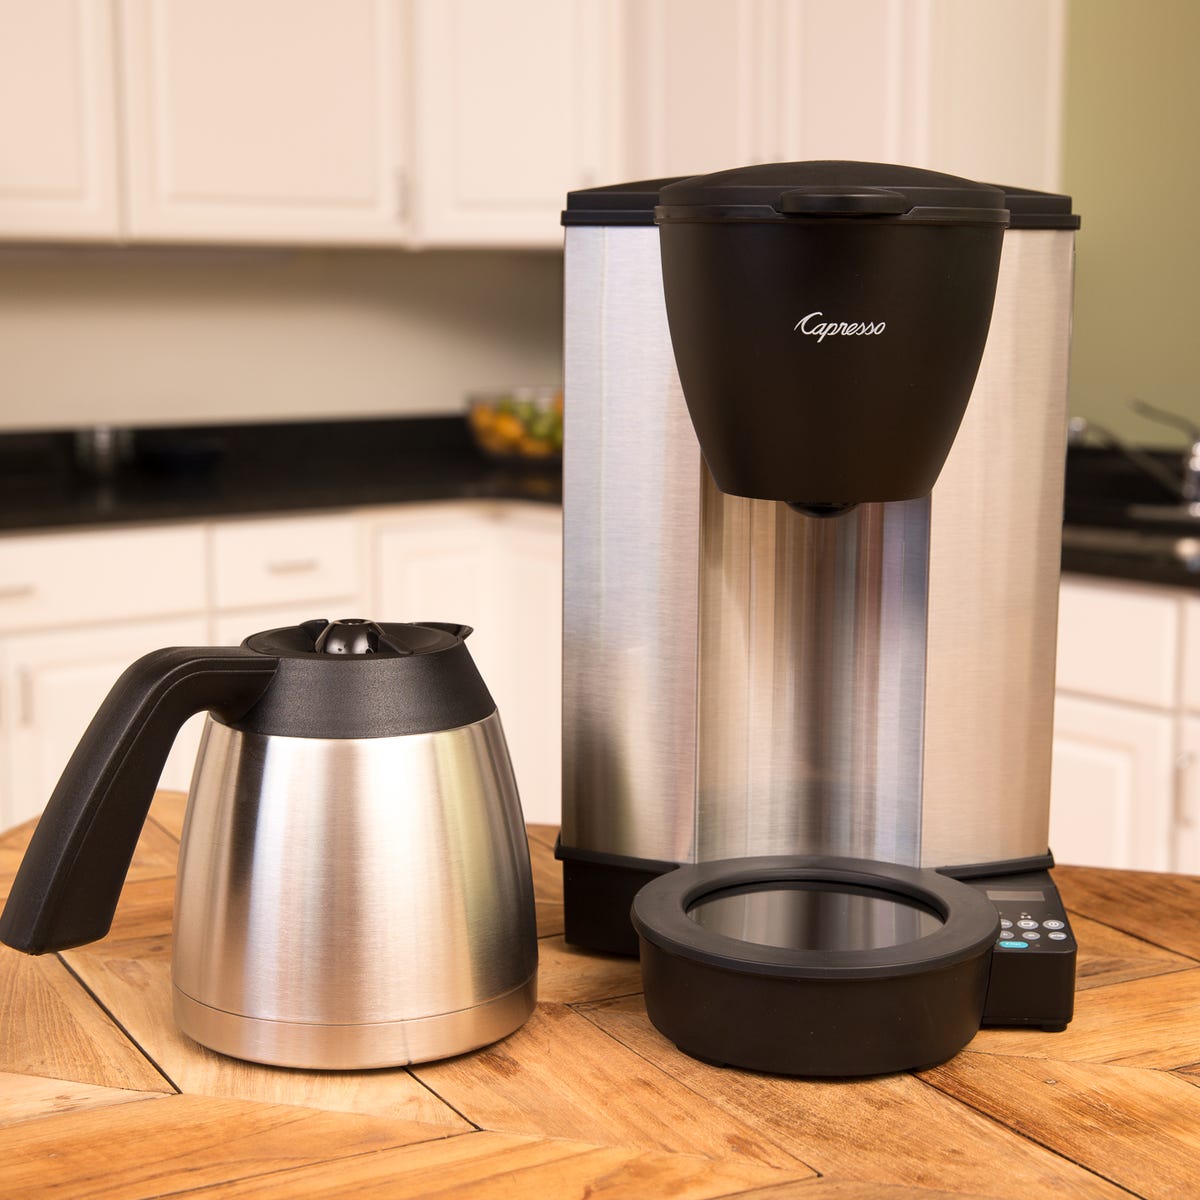 Capresso MT600 review: Get your morning coffee fast, at a